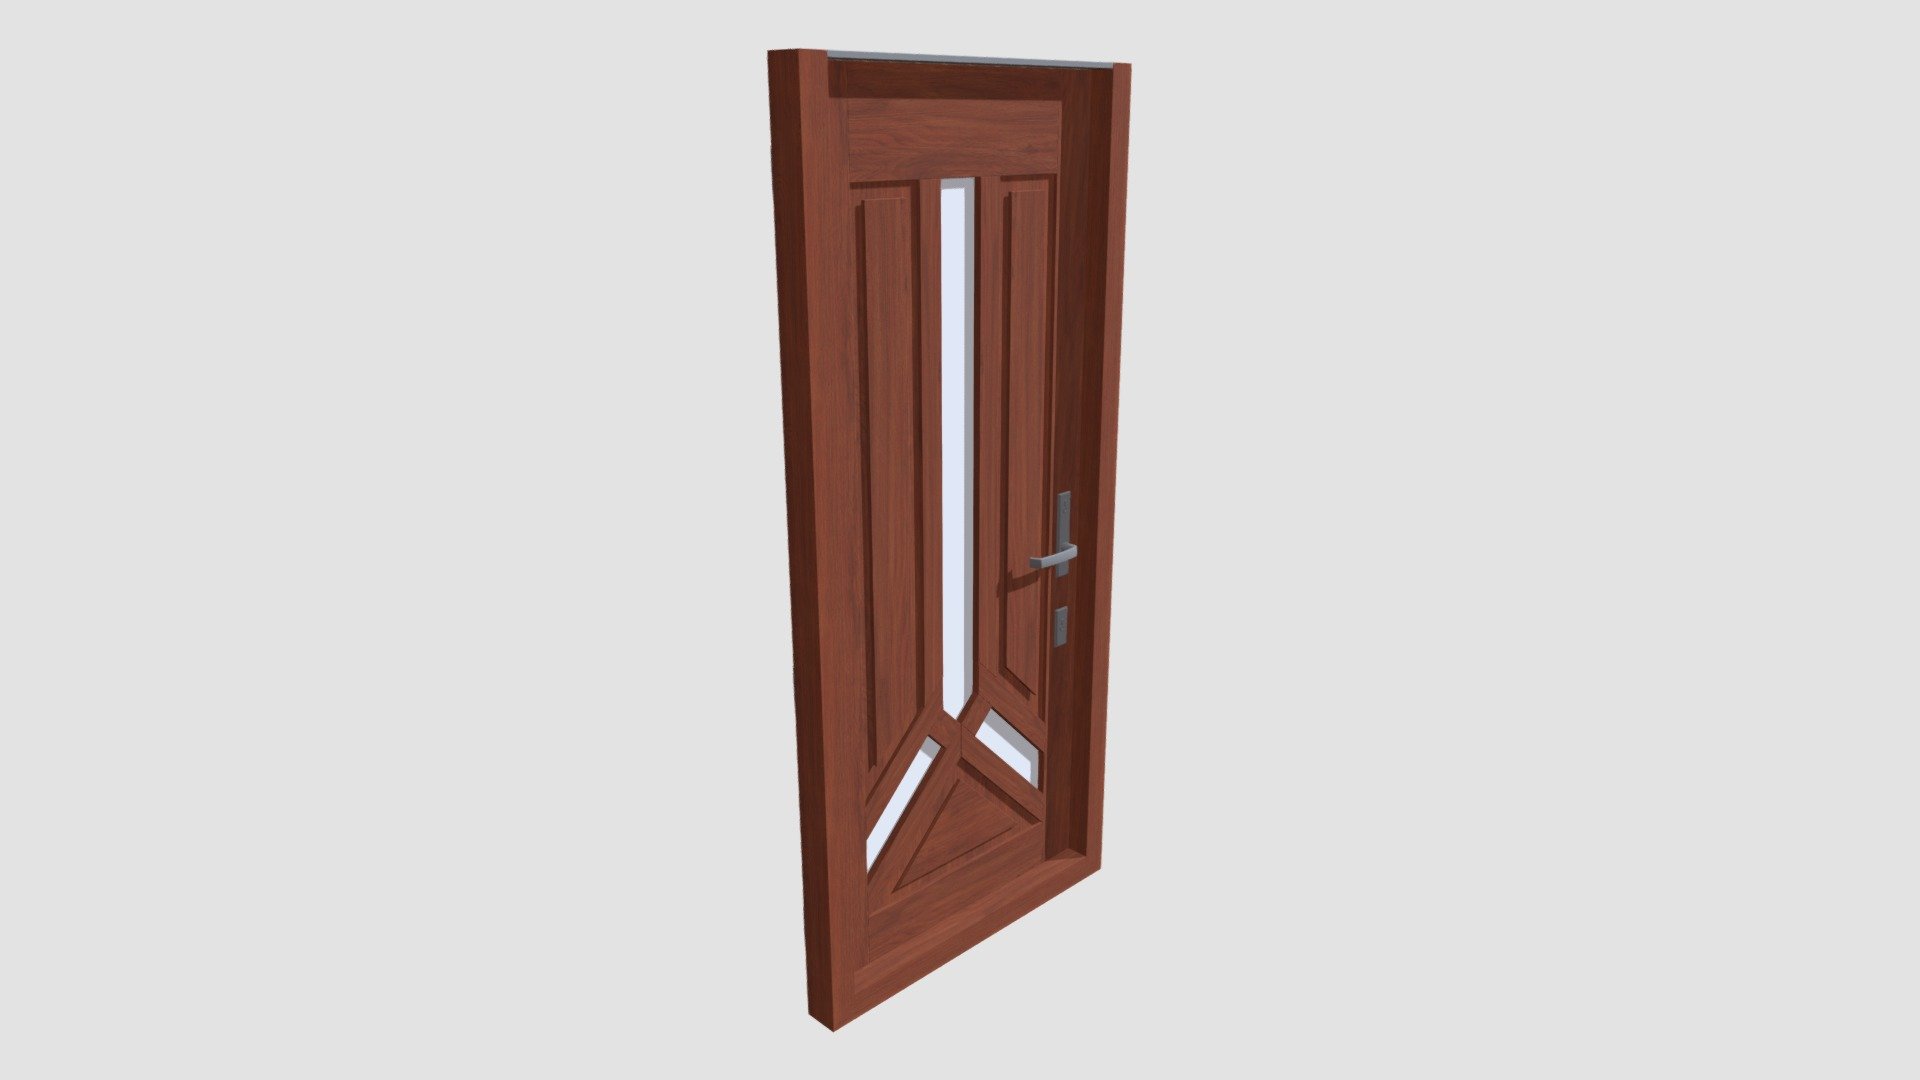 Highly detailed model of door with textures, shaders and materials. It is ready to use, just put it into your scene 3d model